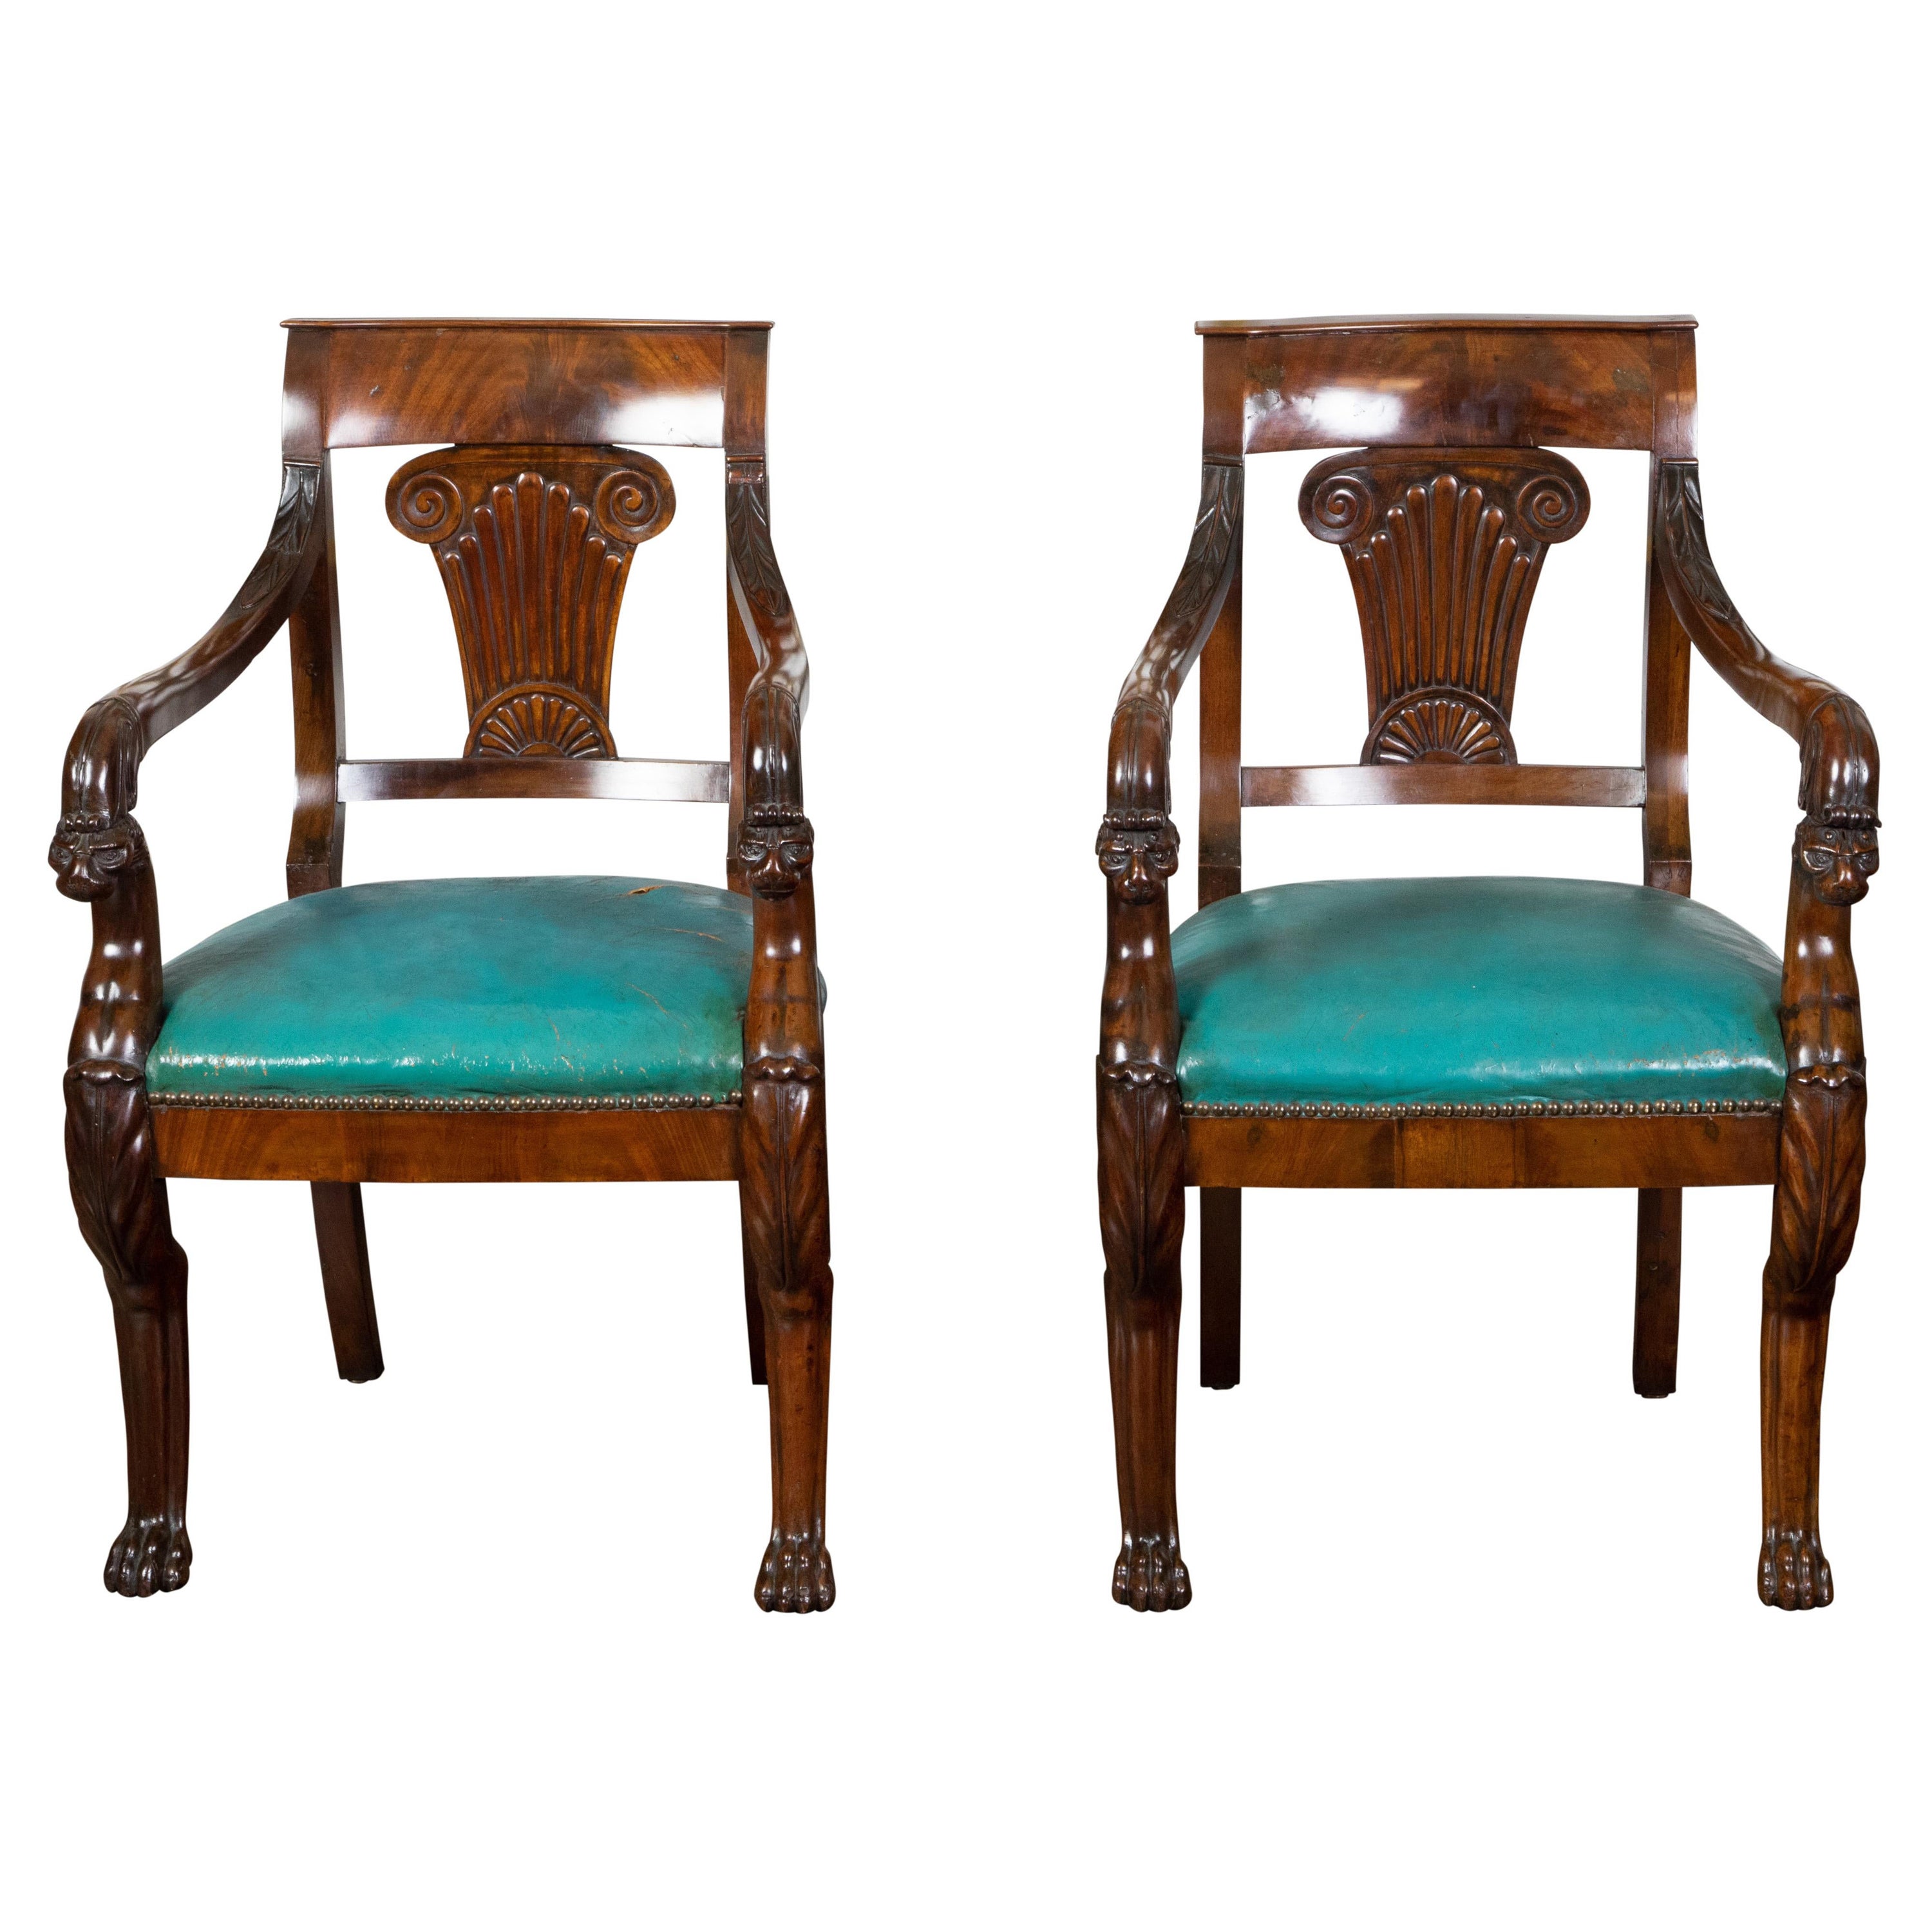 Pair of English Regency 1840s Mahogany Chairs with Ionic Capitals and Griffons For Sale